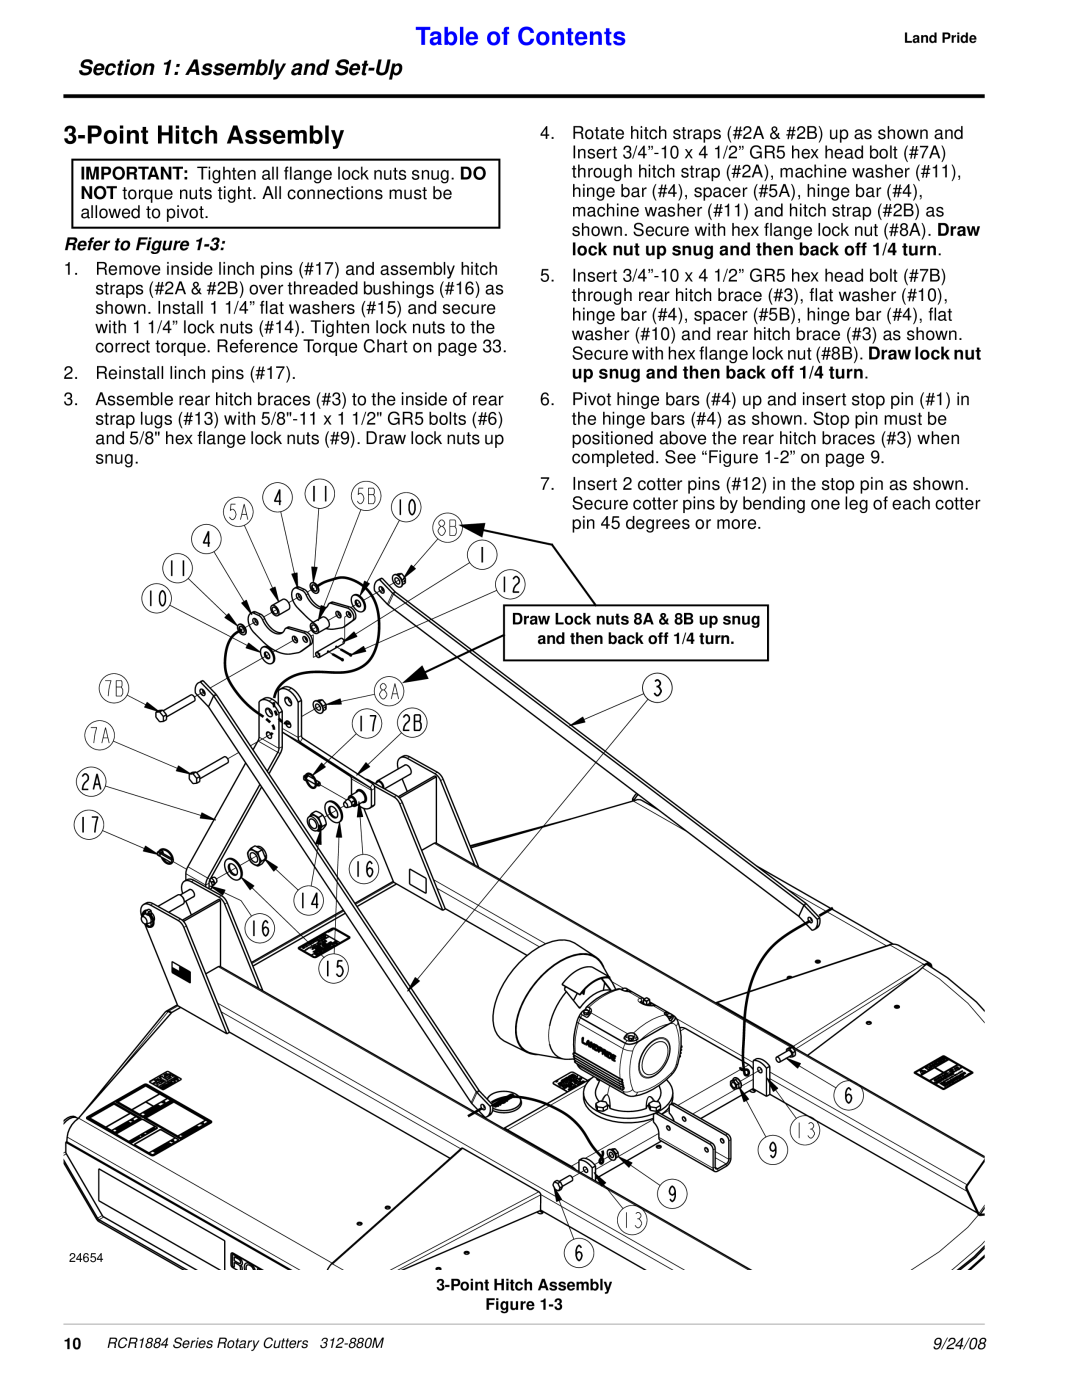 Land Pride RCR1884 manual PointHitch Assembly, Table of Contents, Assembly and Set-Up, Refer to Figure 